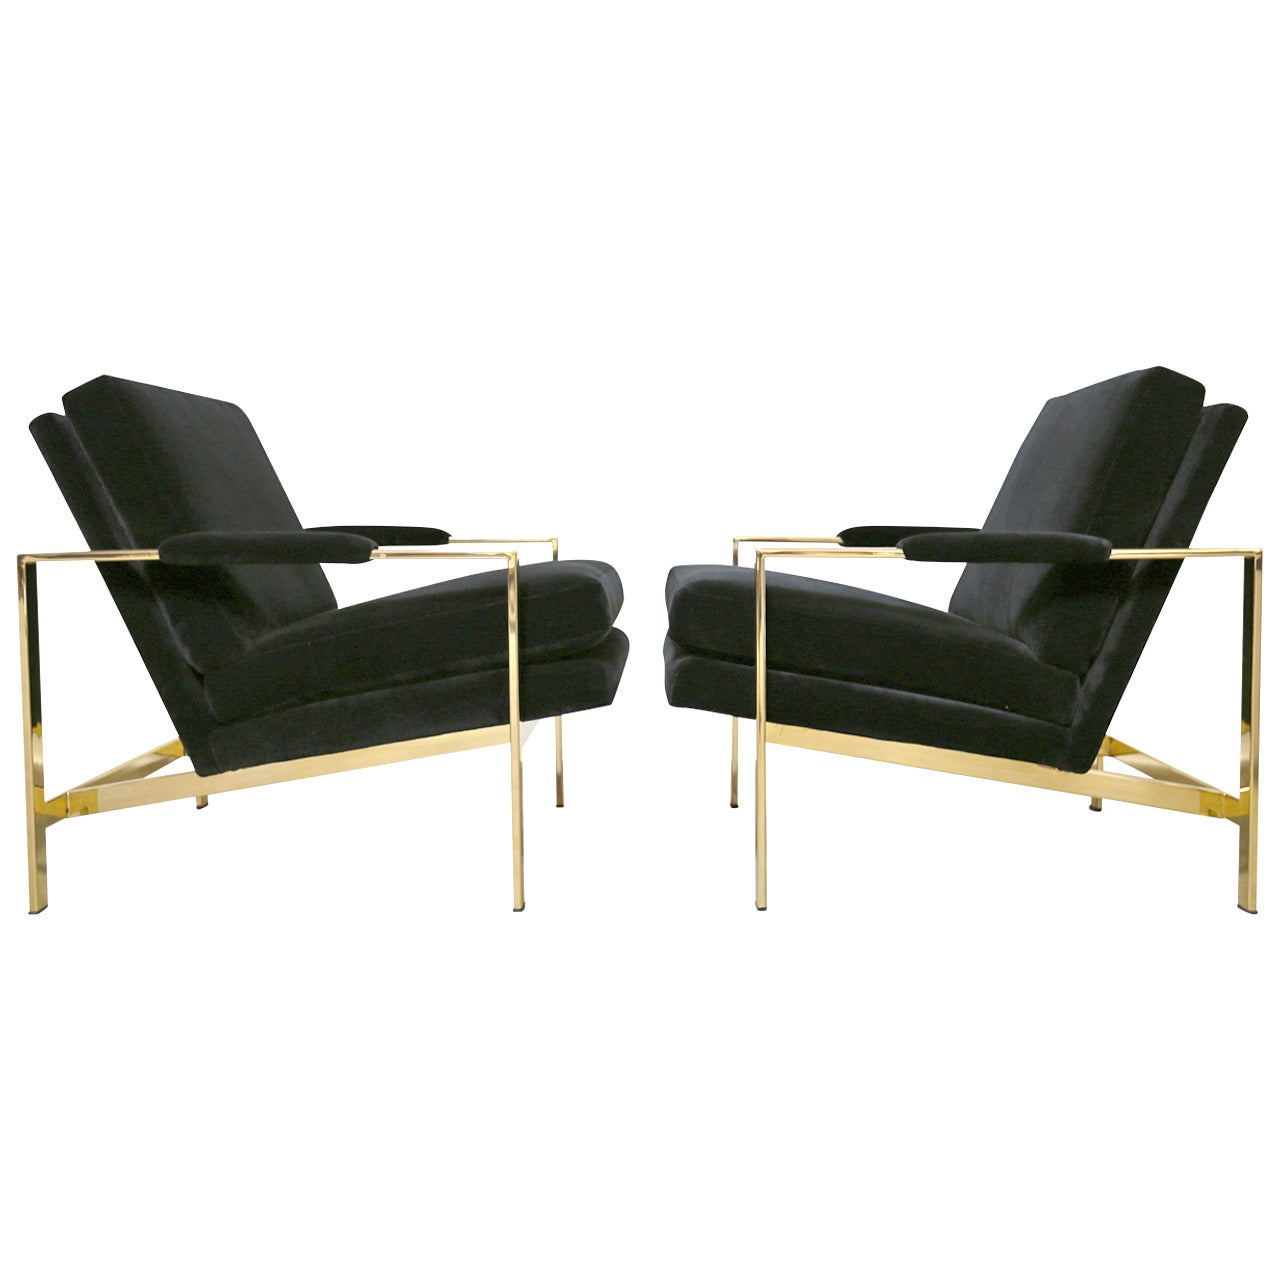 Pair of Mirror Polished Brass Lounge Chairs by Milo Baughman